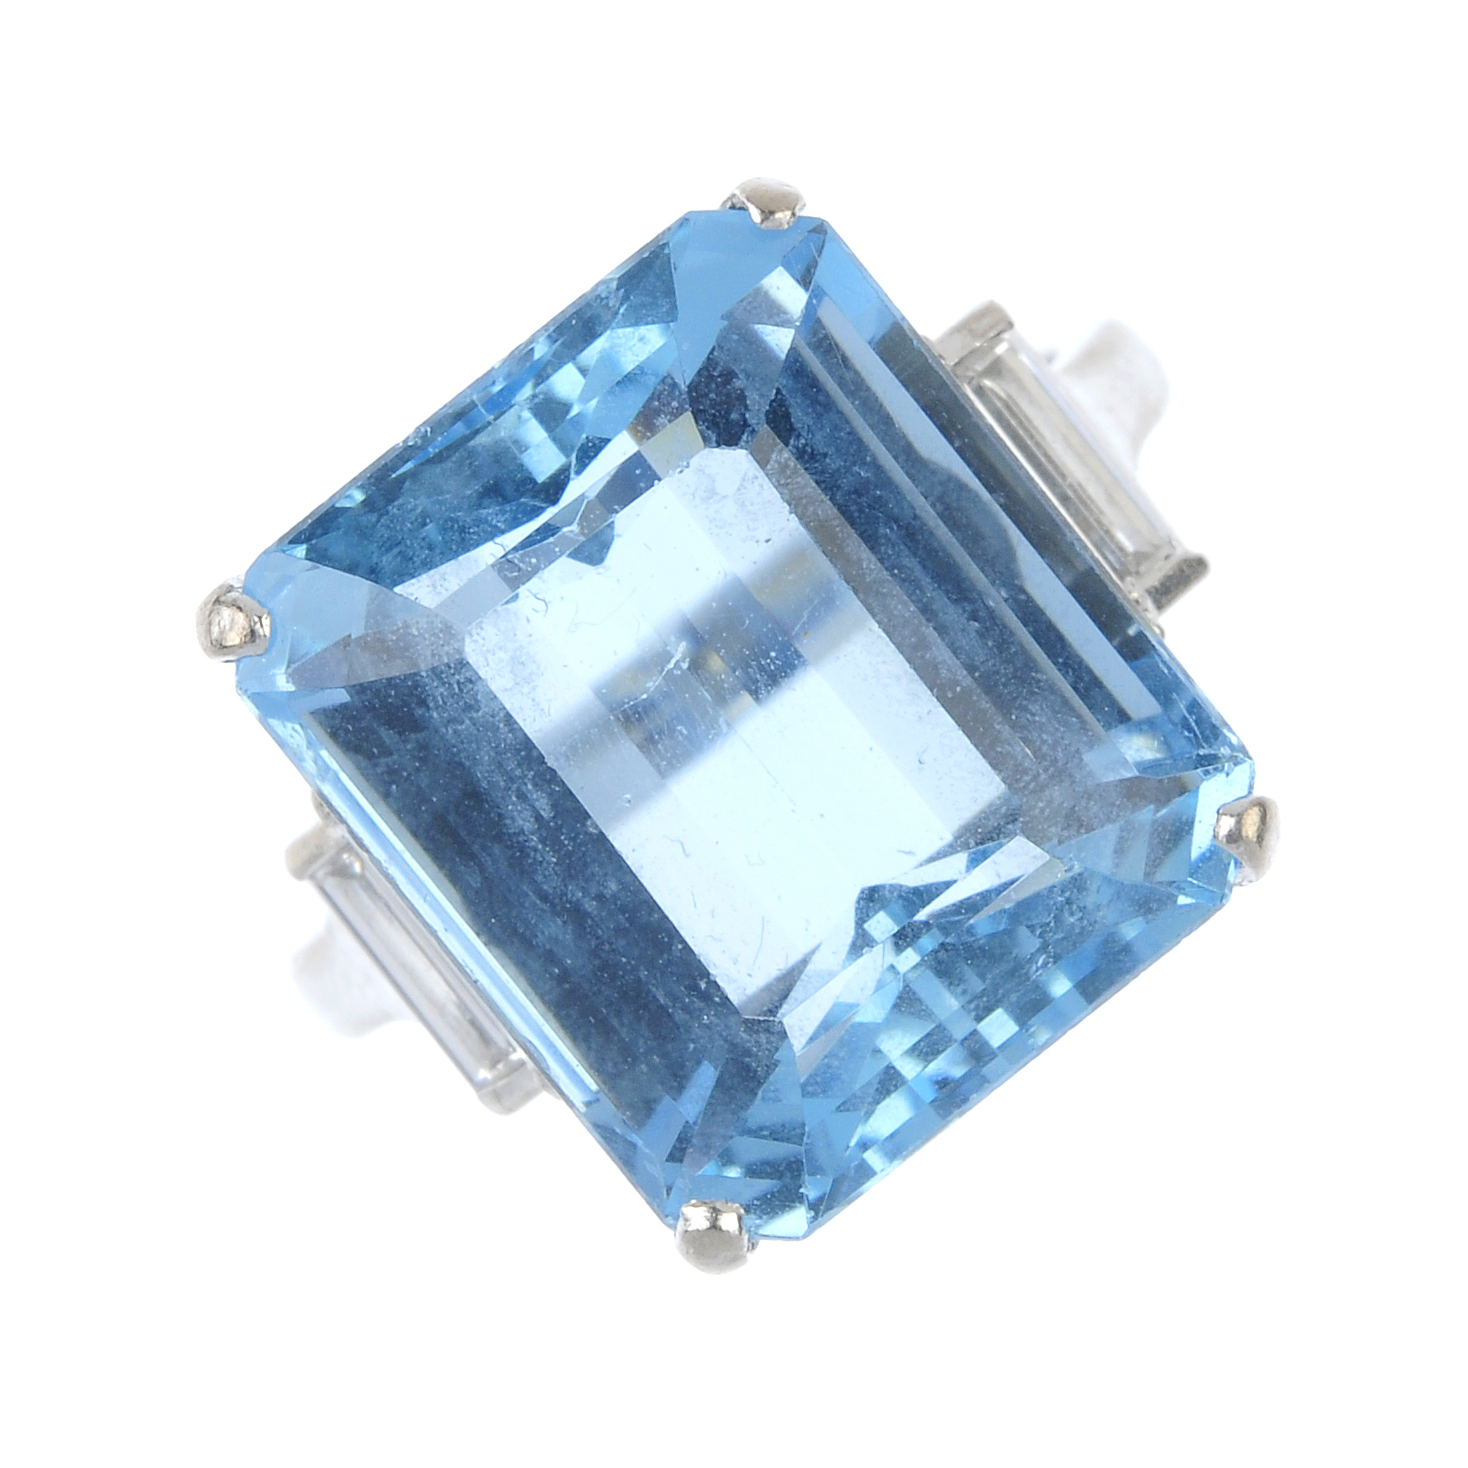 Trend for colored gemstone rings continued at UK auction